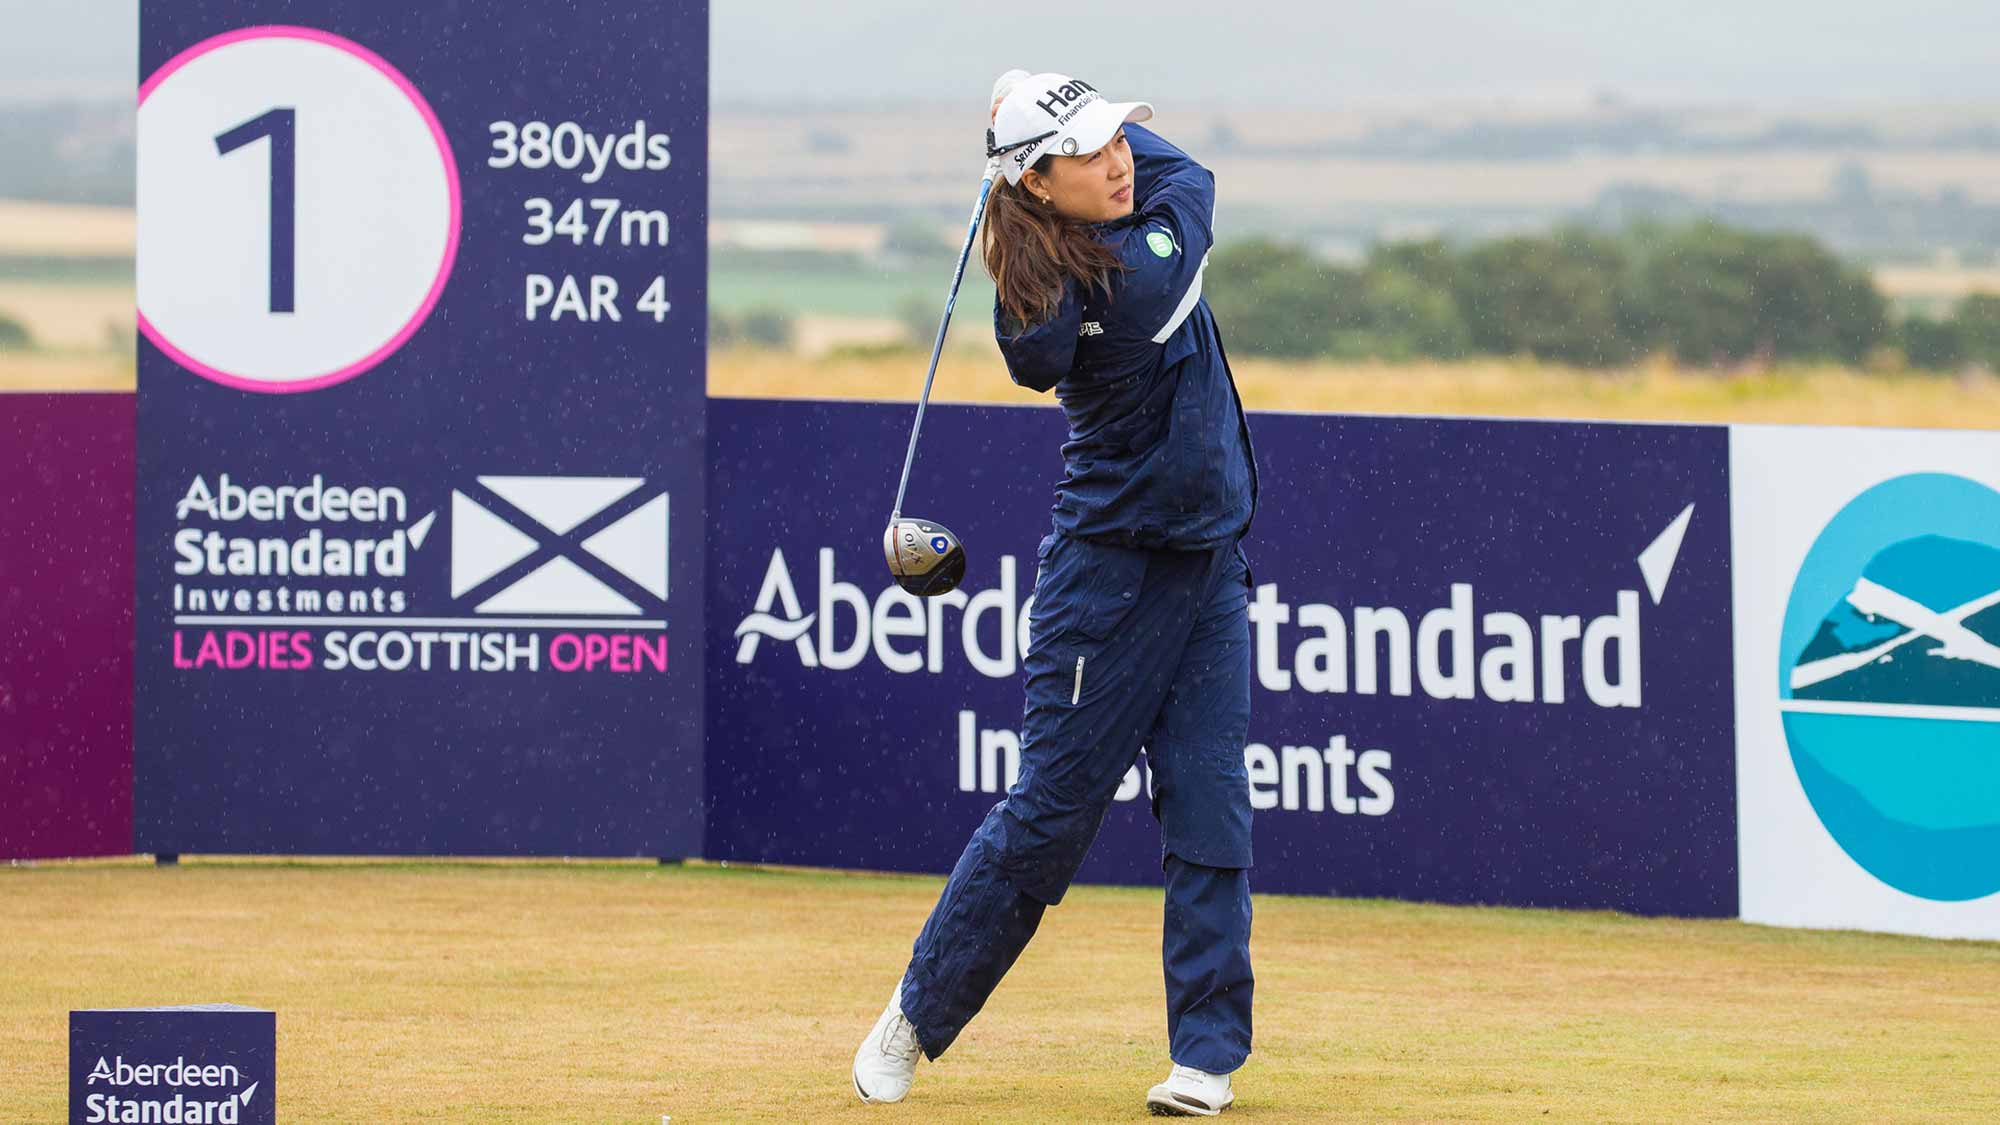 Minjee Lee On The First Tee During the Final Round of the Aberdeen Standard Investments Ladies Scottish Open at Gullane Golf Club